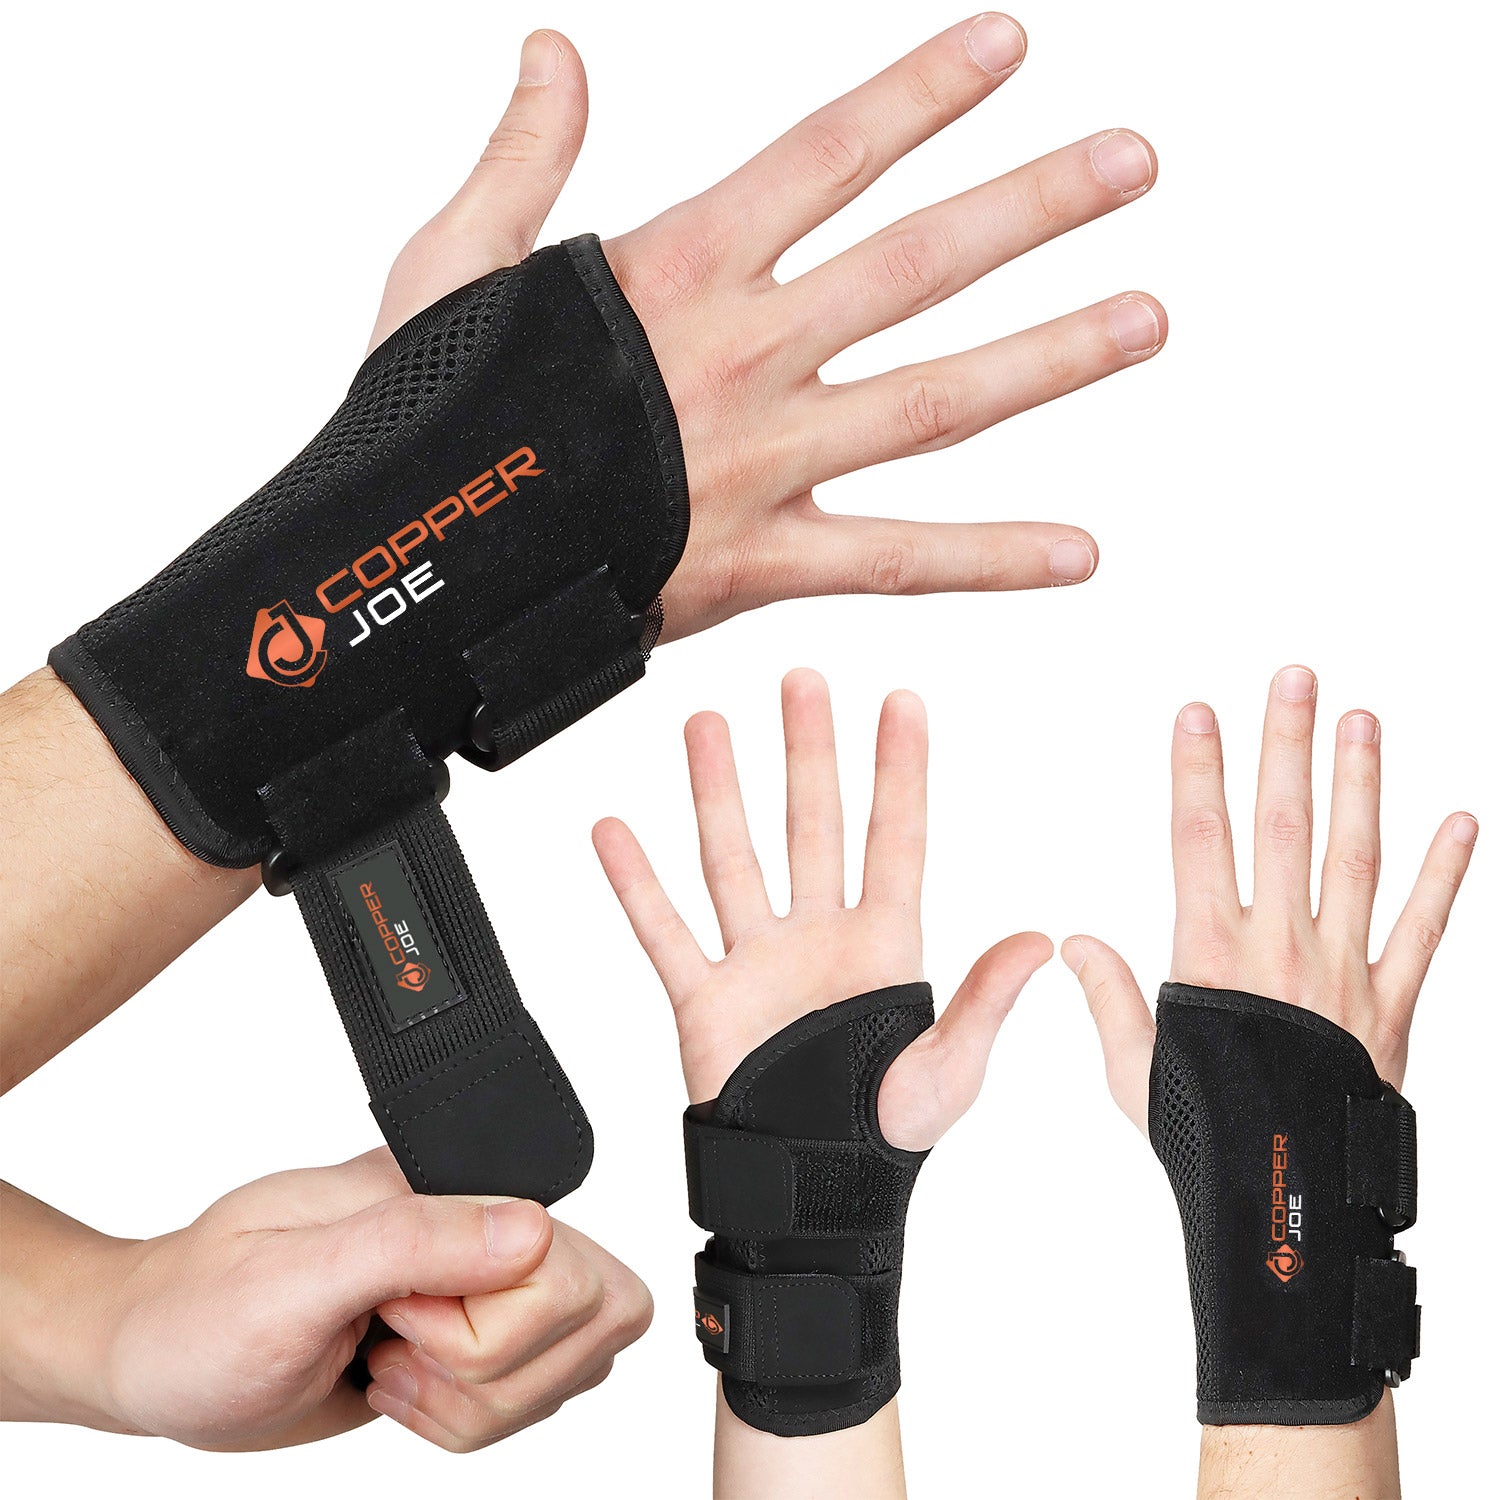 Copper Joe Ultimate Copper Infused Wrist Brace for Carpal Tunnel,  Tendonitis, Arthritis- Day and Night Wrist Support Brace - For Men and  Women, Left